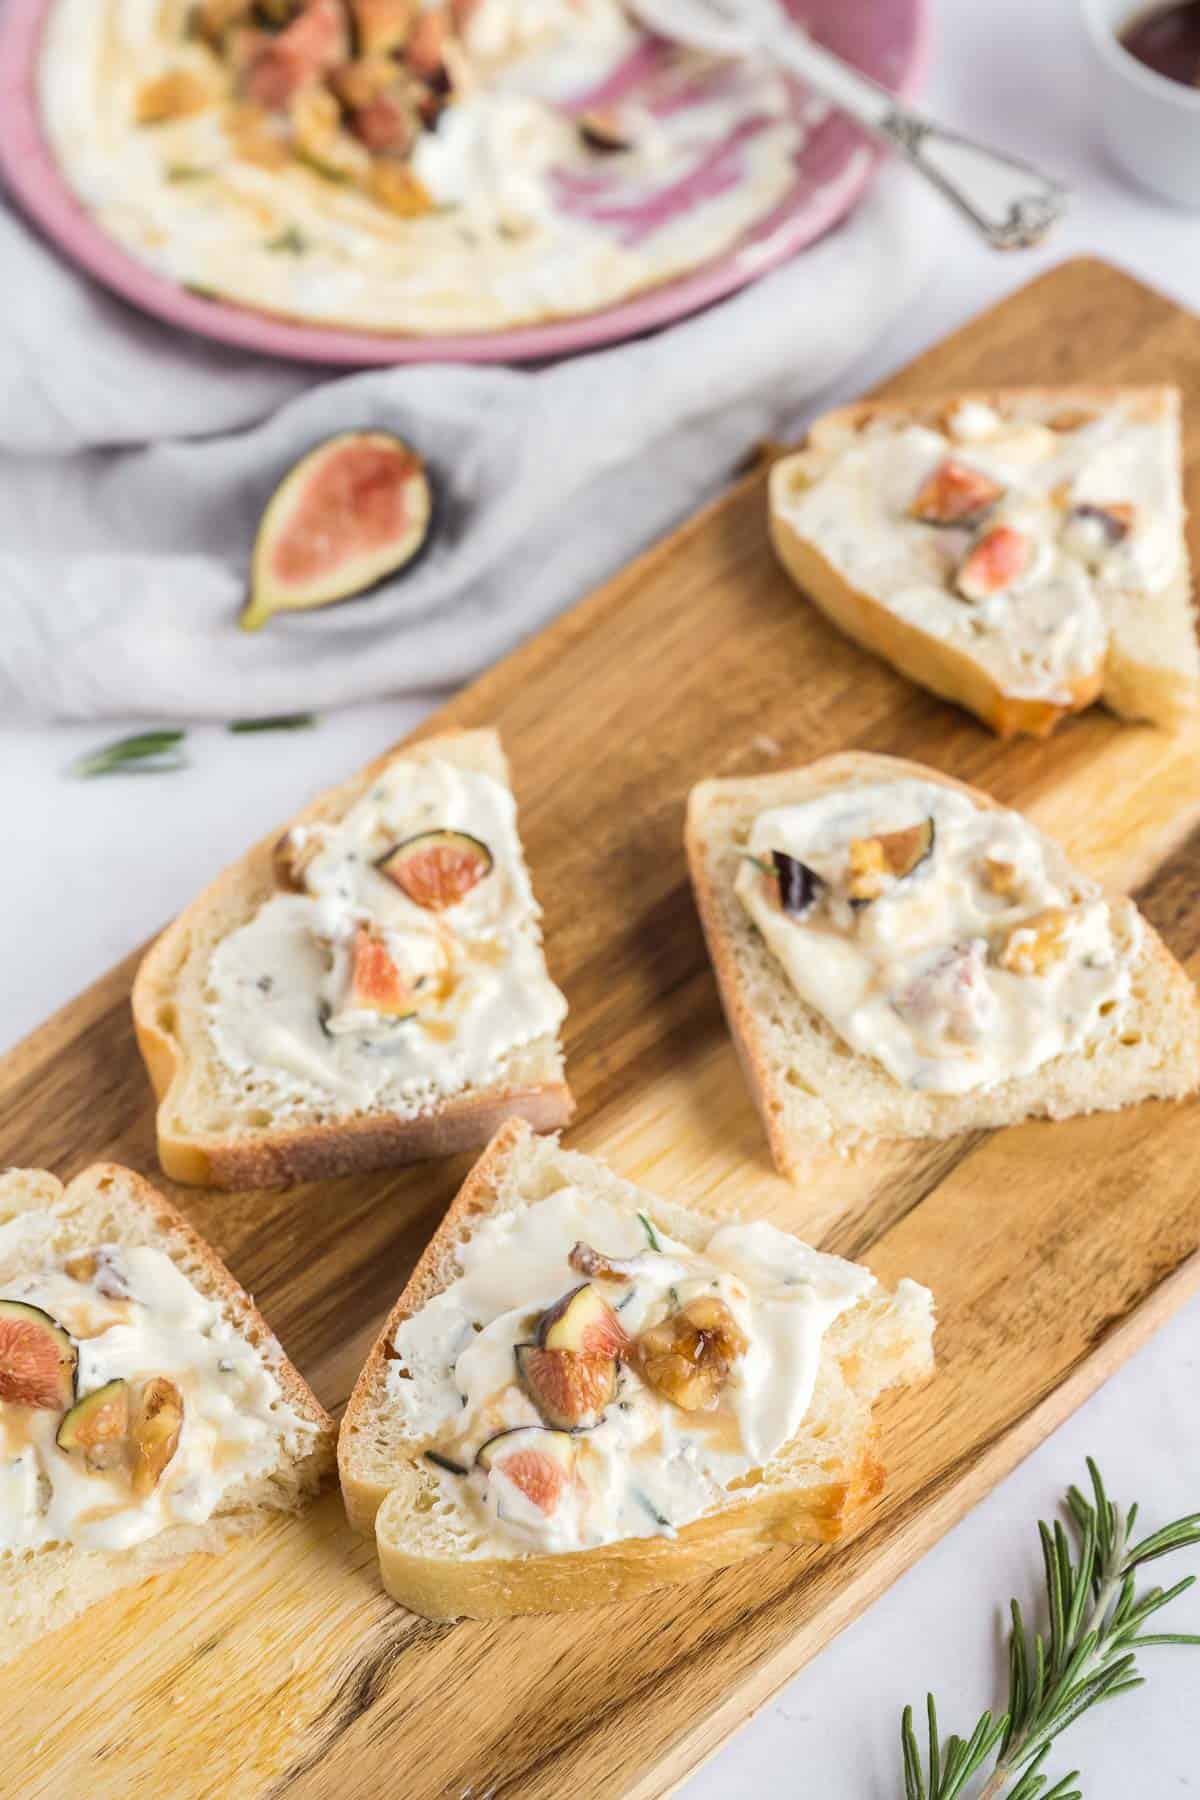 Artisan bread slices smeared with whipped feta dip and garnished with chopped figs and drizzle honey on a wood serving board.